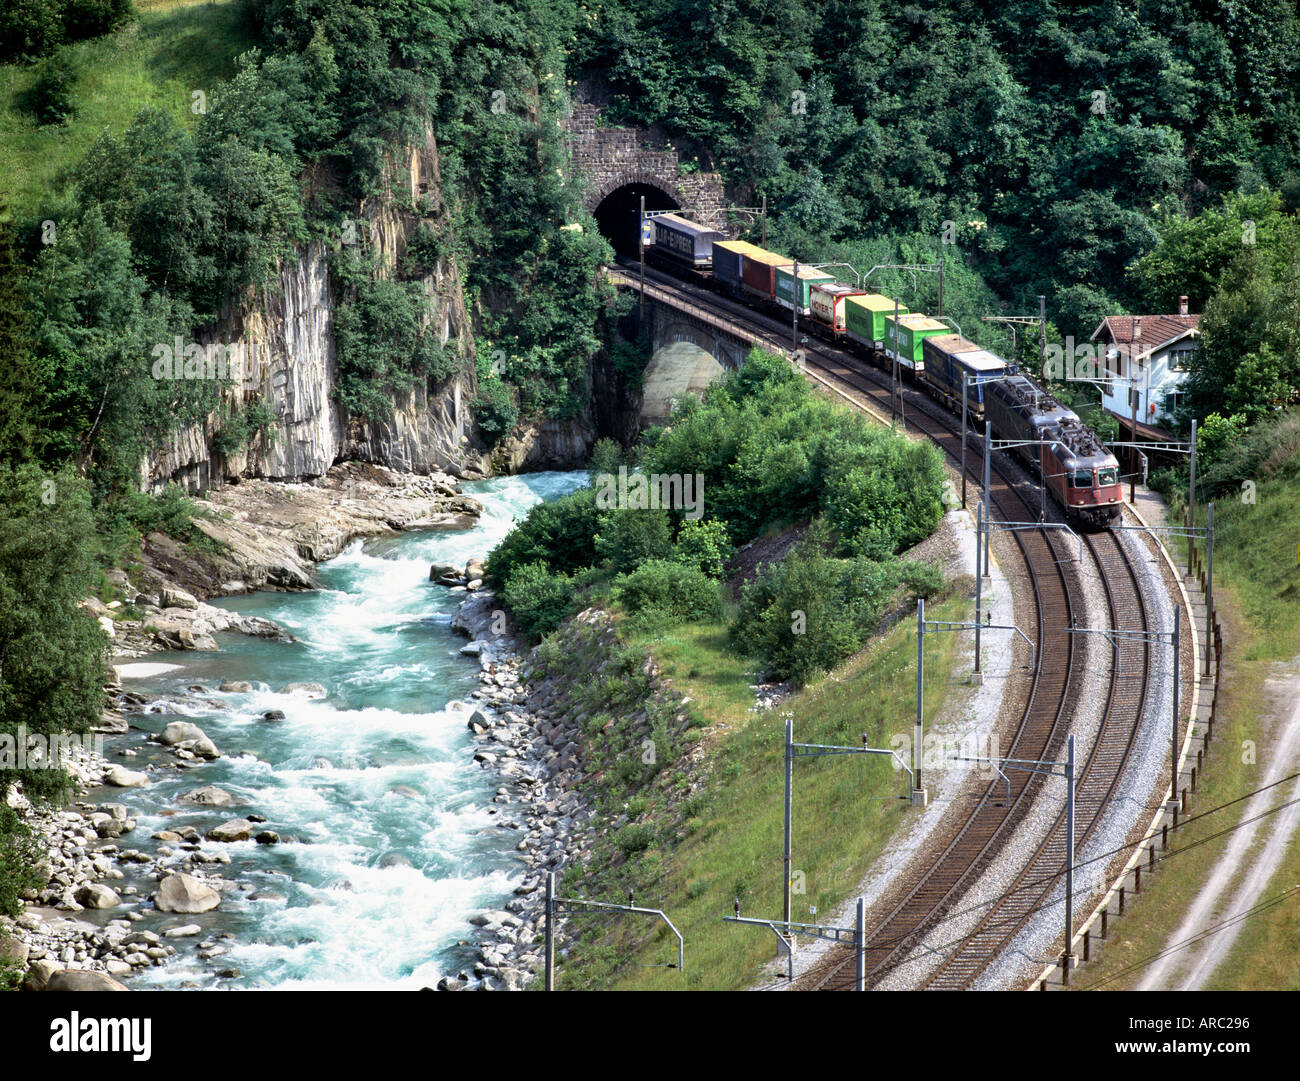 A freight train crosses the River Reuss near Wassen in the Swiss Alps Stock Photo